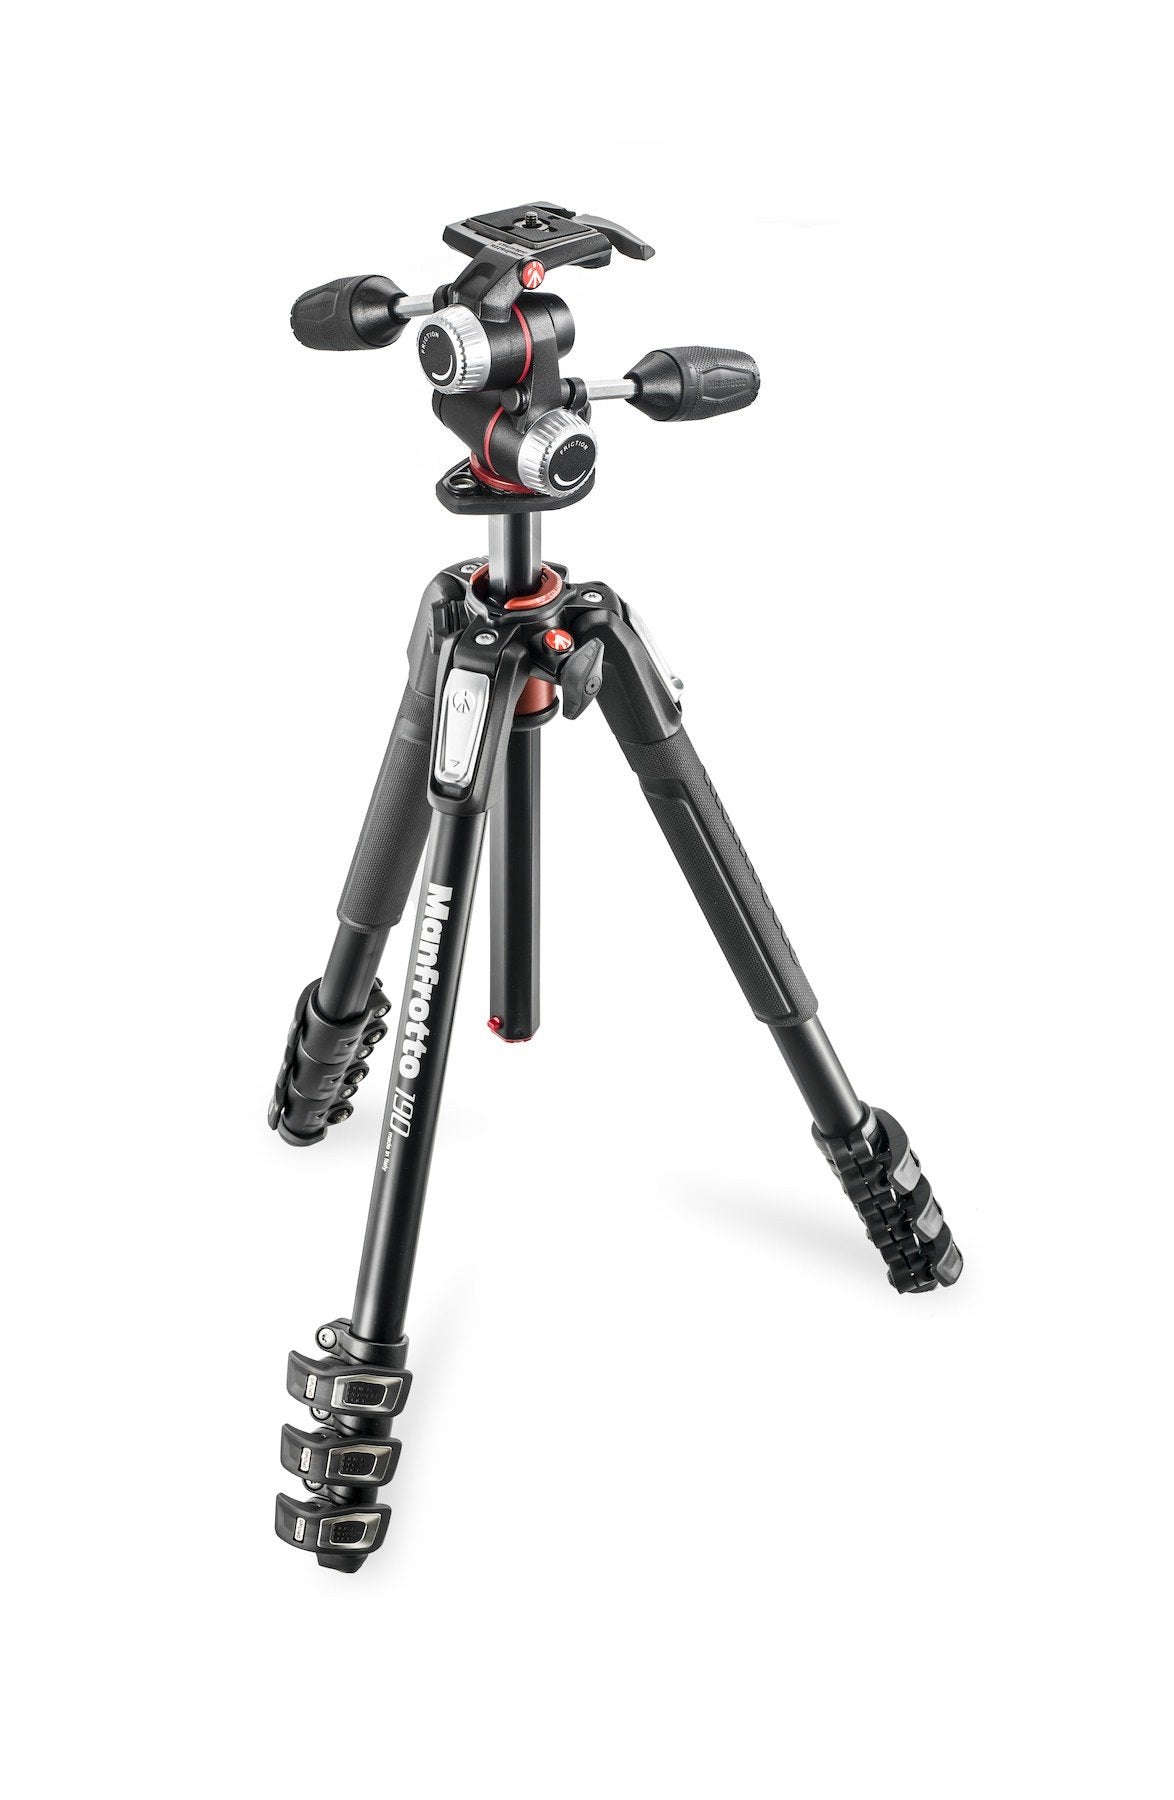 Manfrotto MK190XPRO4-3W New 190 Alu 4-Section Kit with XPRO 3-Way Head Manfrotto Photo Tripod Kit